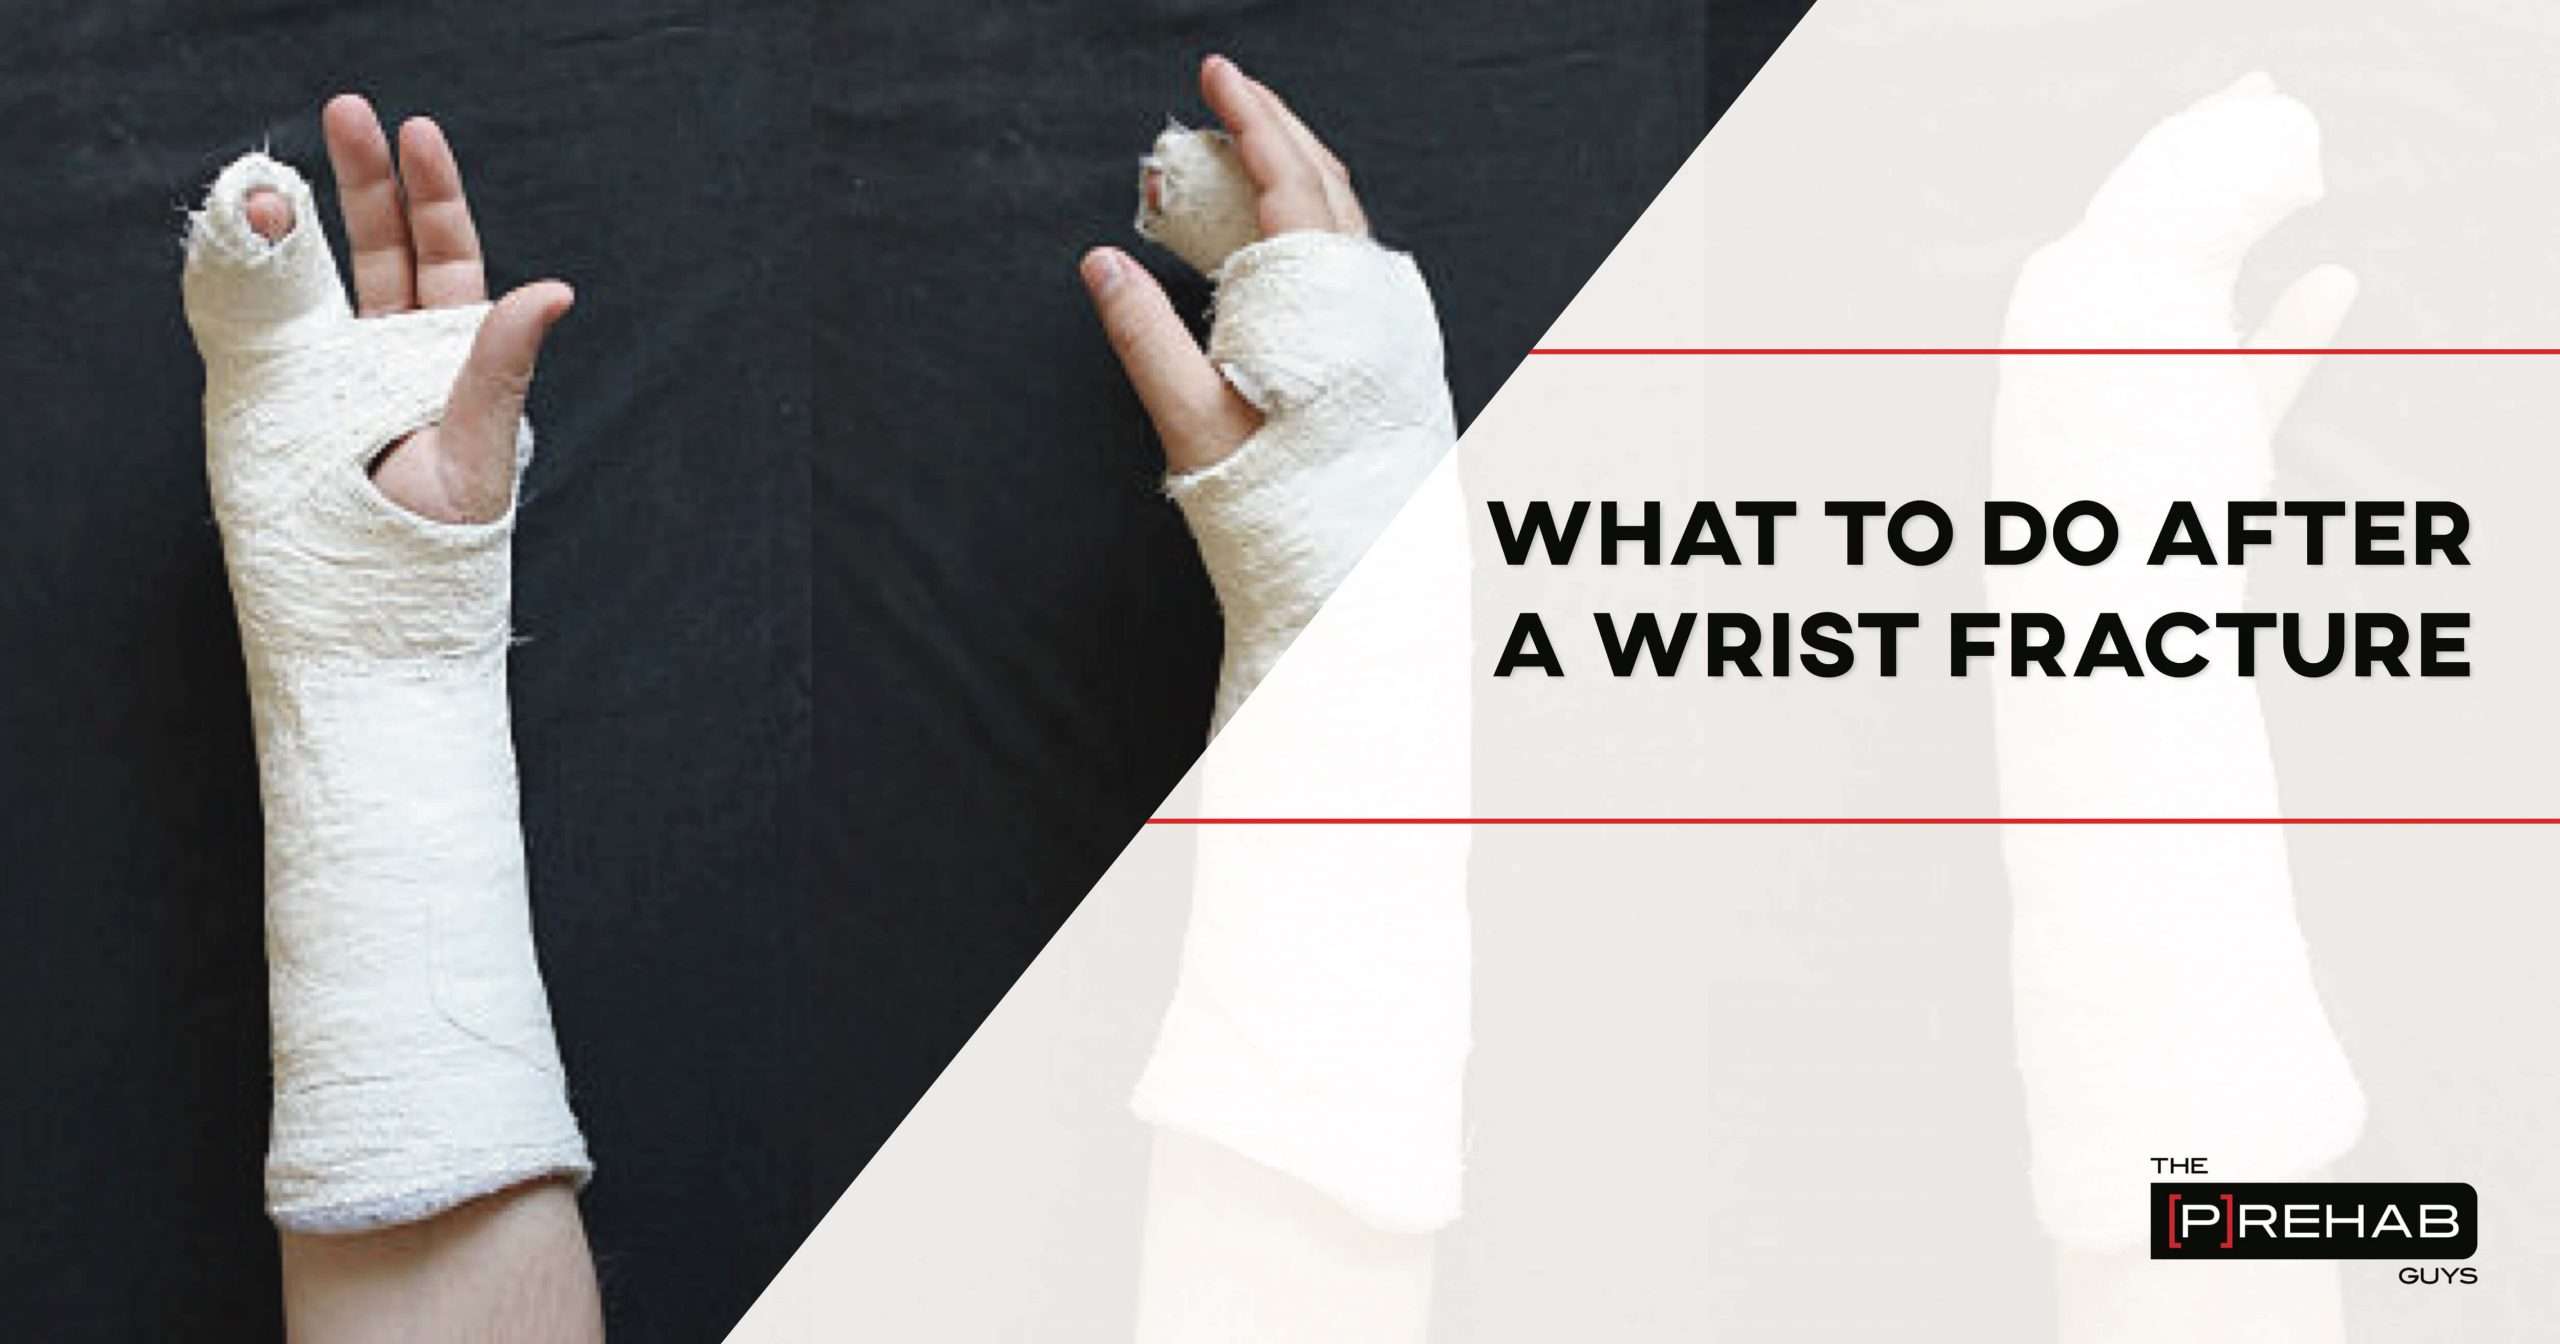 What To Do After A Wrist Fracture With Exercises